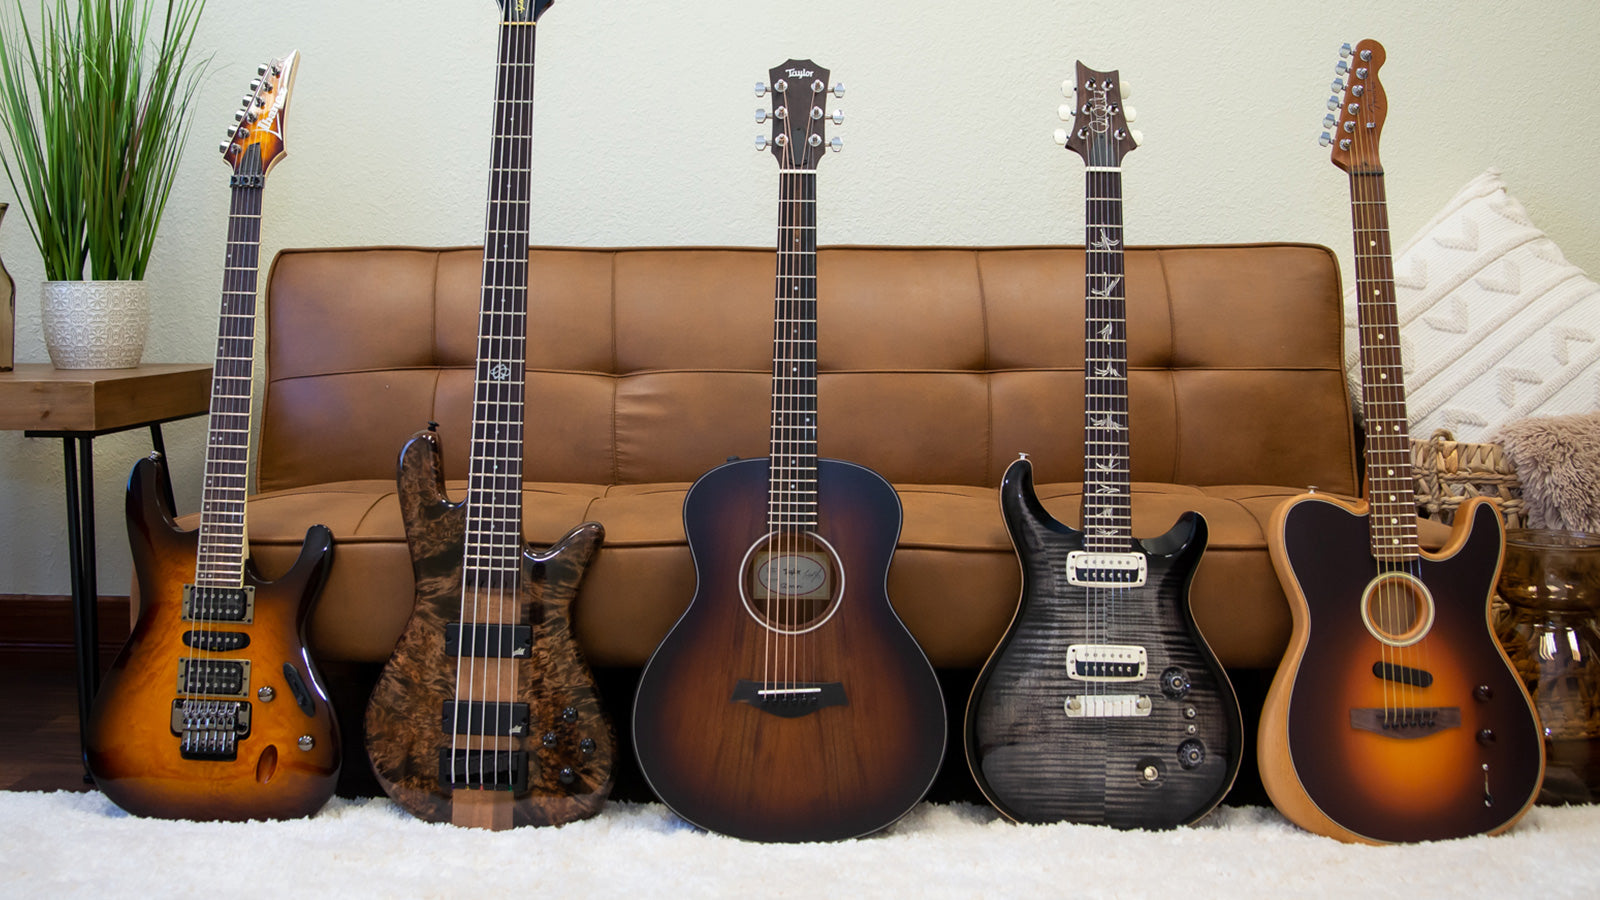 Image of guitars and basses leaning against a couch